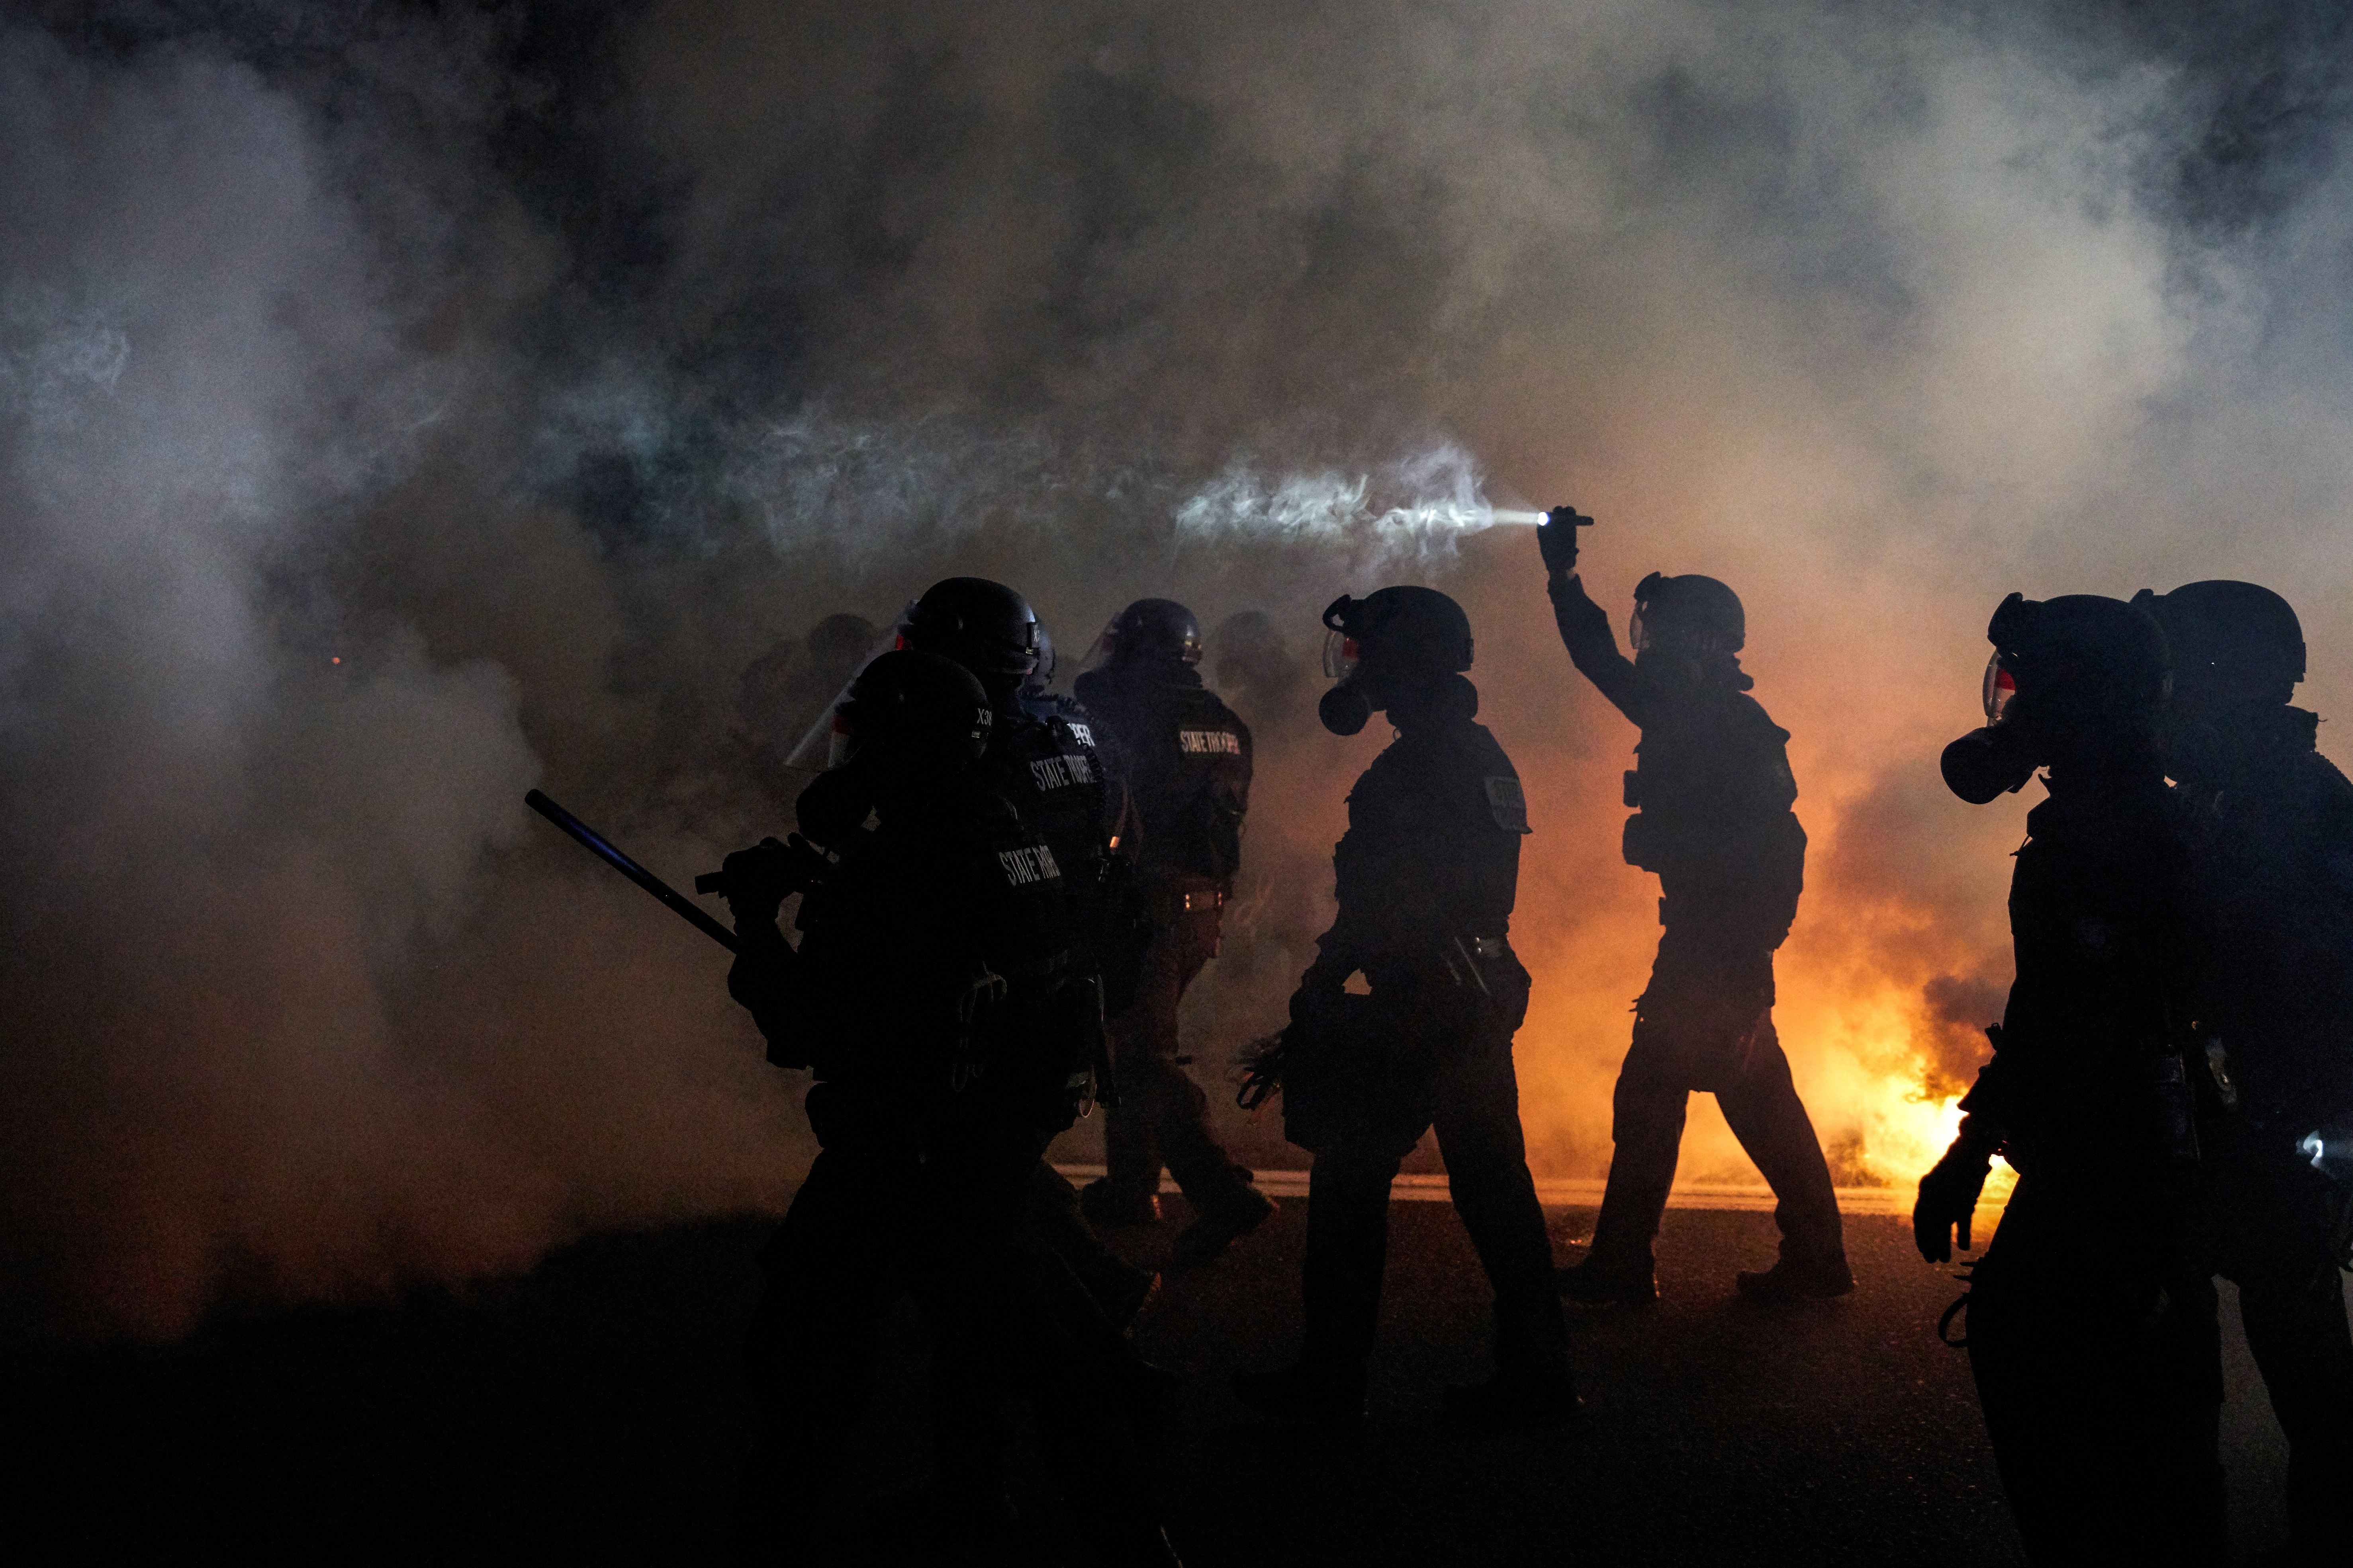 Oregon Police wearing anti-riot gear march towards protesters through tear gas smoke during the 100th day and night of protests against racism and police brutality in Portland, Oregon, on September 5, 2020